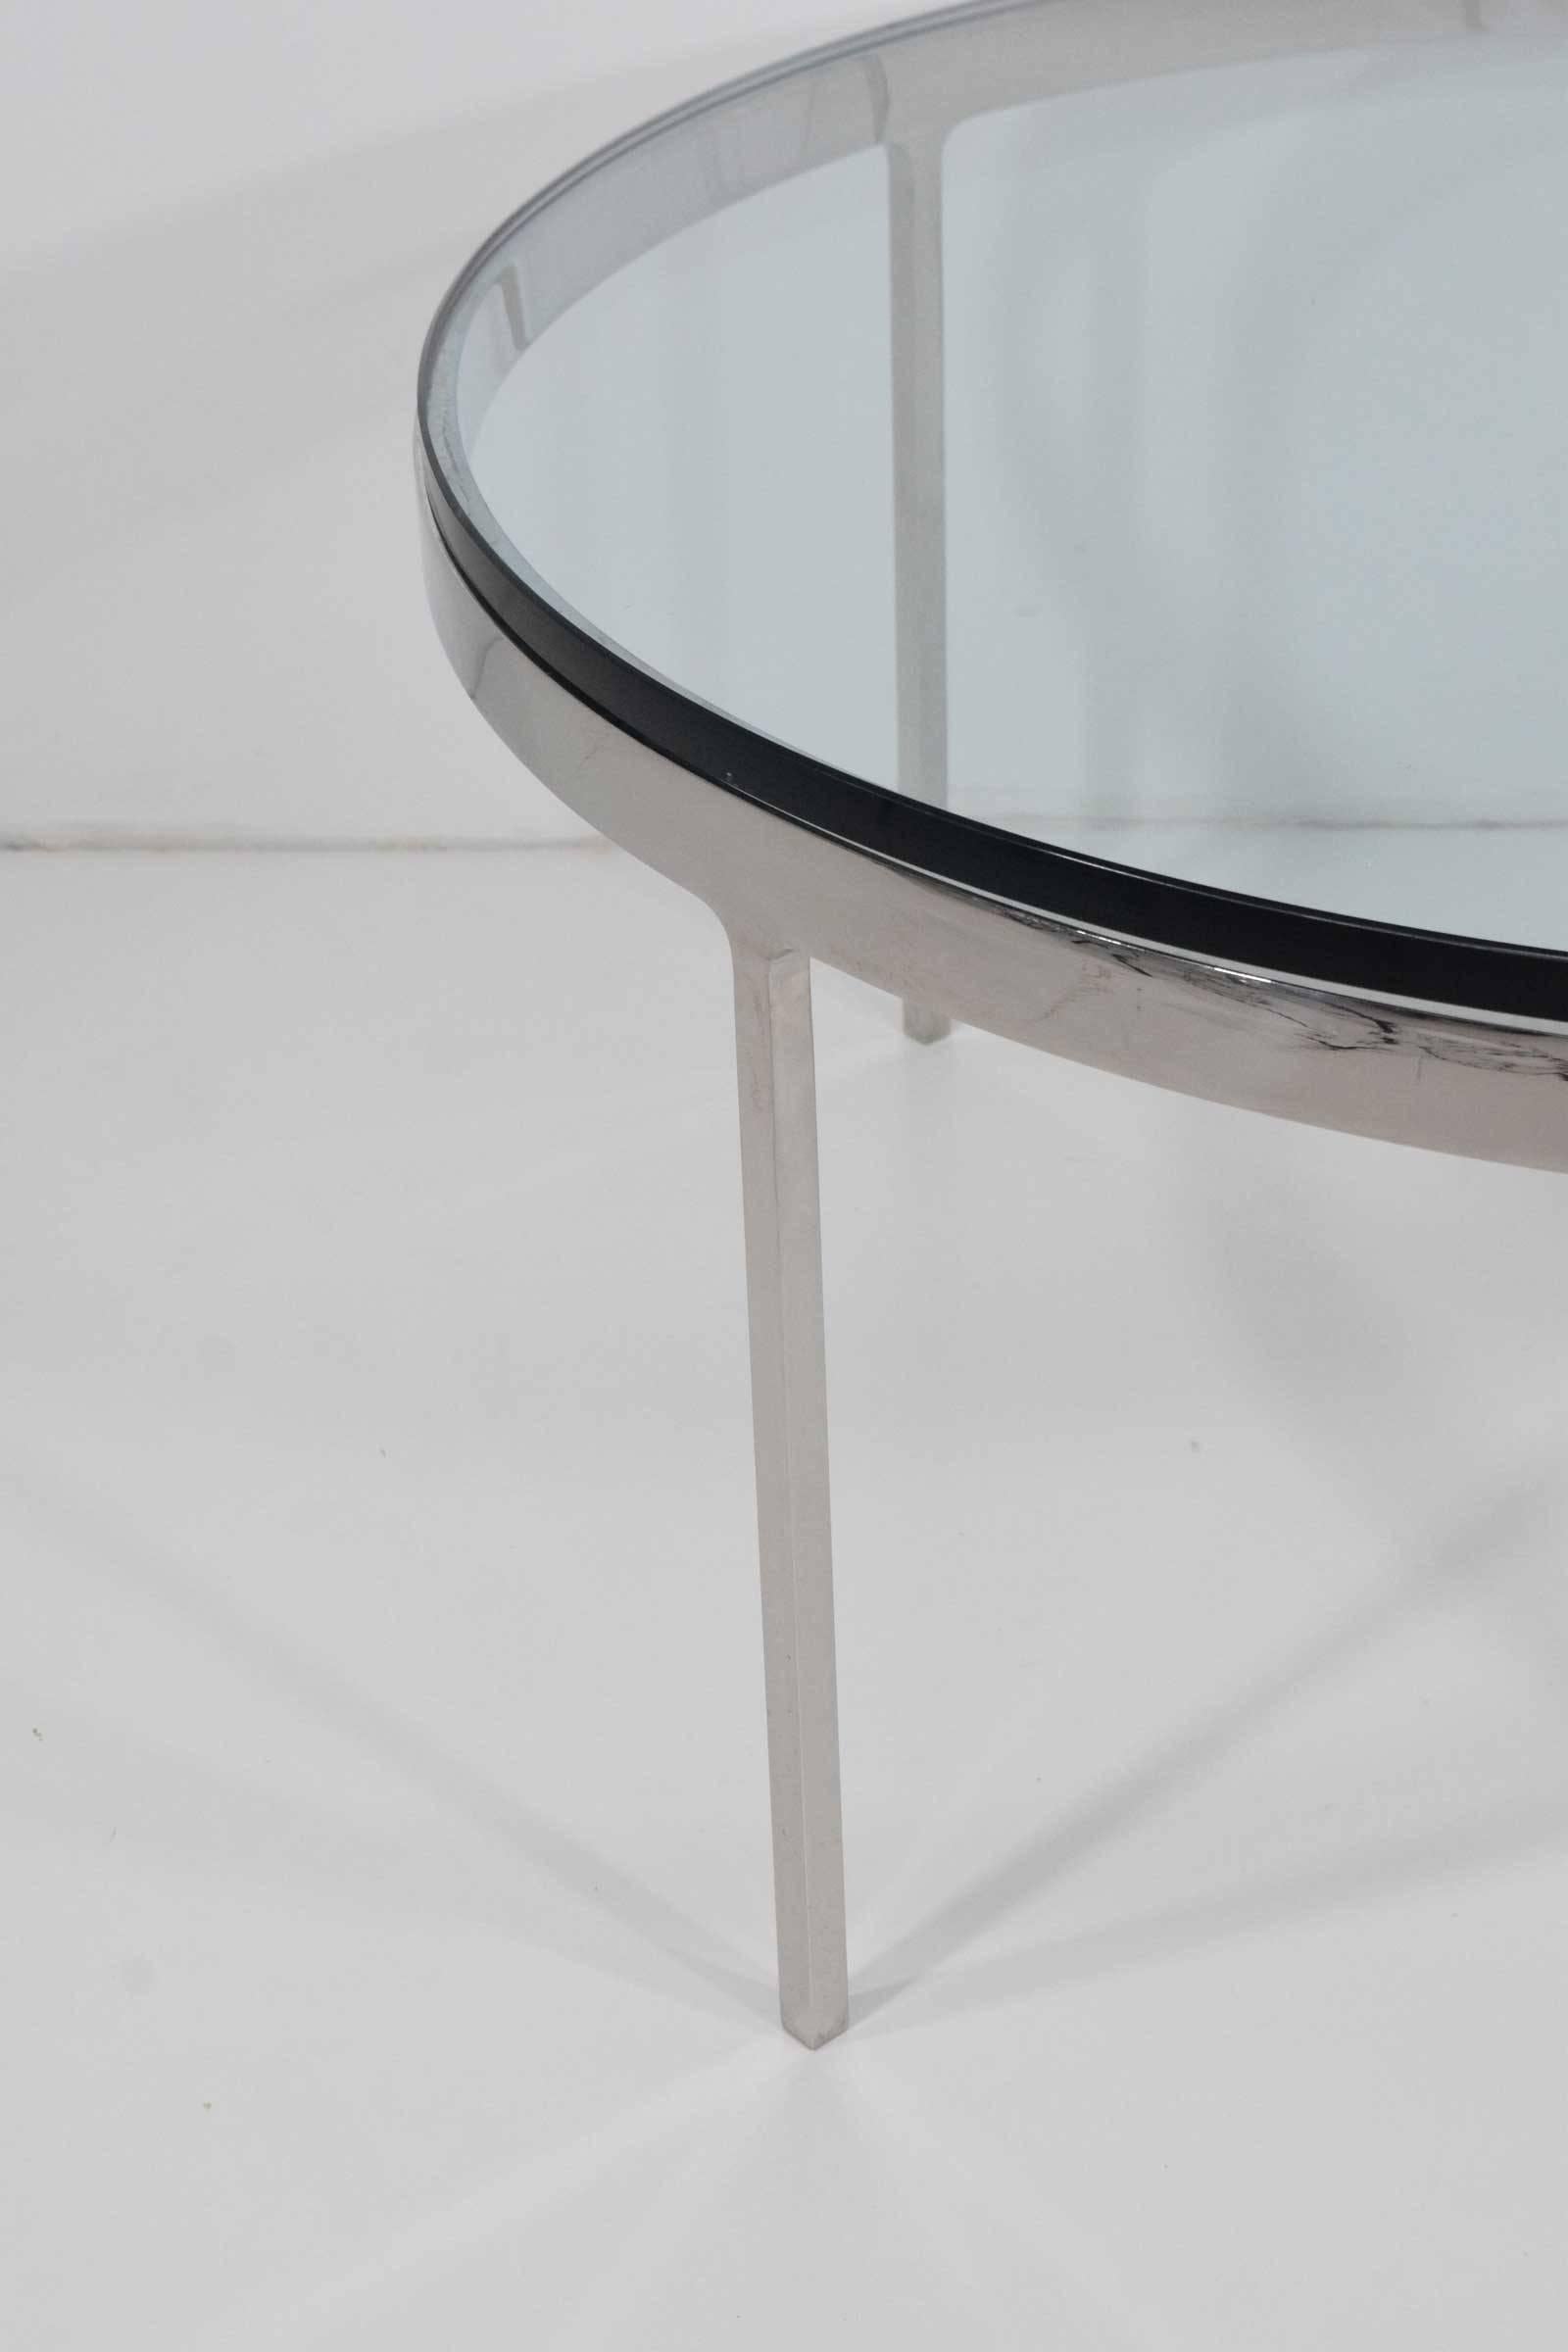 A polished stainless steel cocktail or coffee table by Nicos Zographos. Not a single seam, fabricated perfectly. Like a stiletto heel. Measure: 3/4